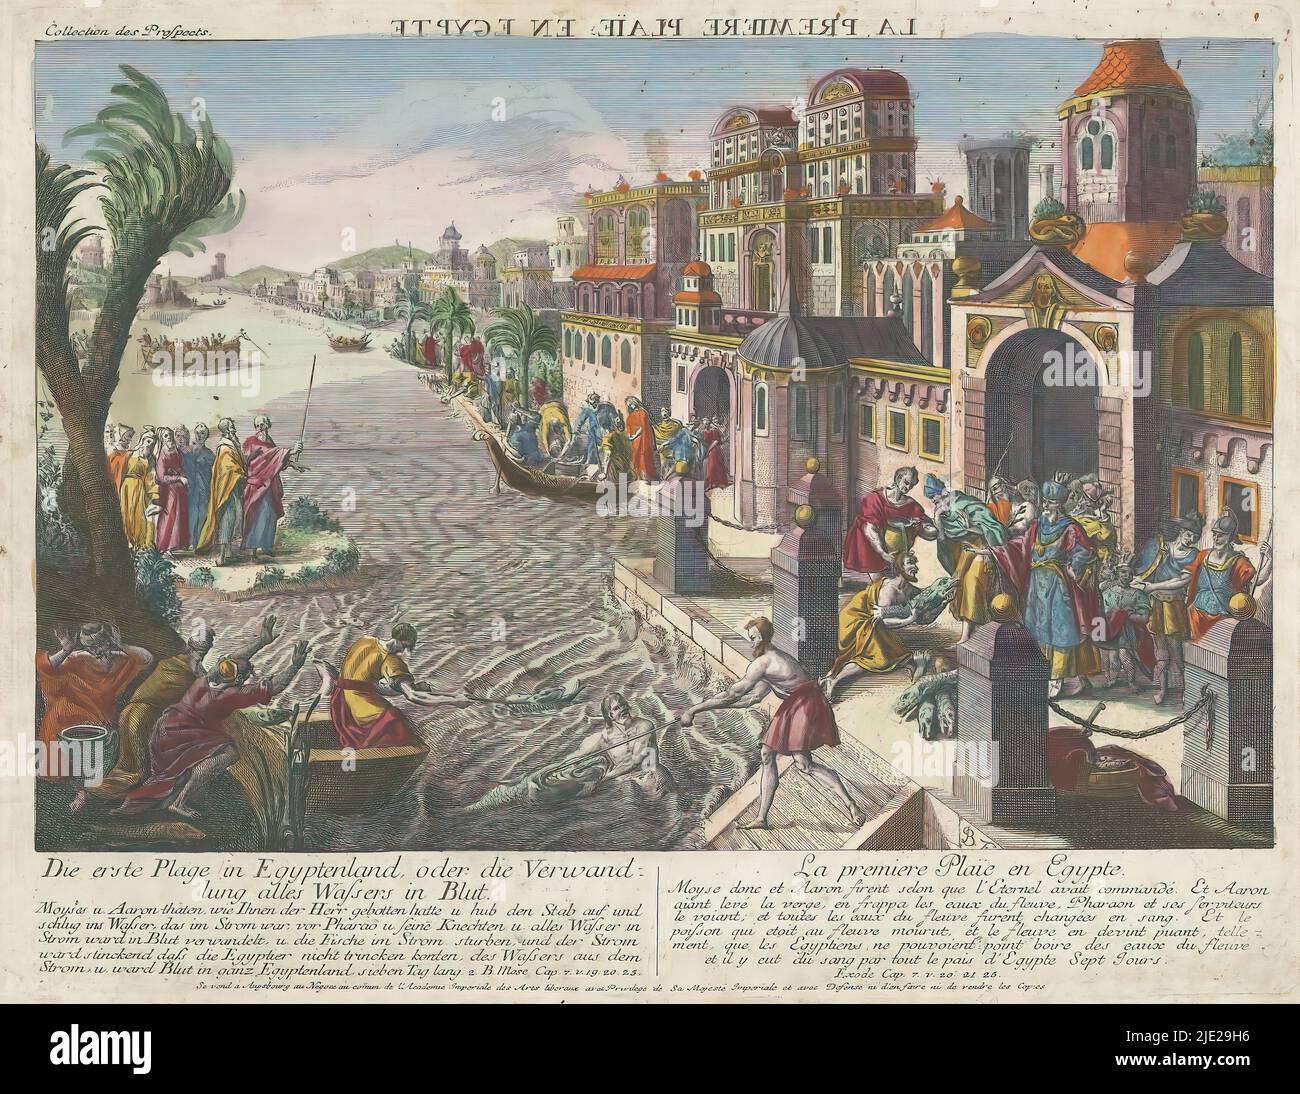 The first plague of Egypt, Die erste Plage in Egyptenland (...) (title on object), The plague of water turned to blood. View of a city on a river. On the bank to the left Moses beating the water with his stick. On the right on the quay is Pharaoh and his entourage. The water is stained red and dead fish are being pulled out. Below print explanations in German and French., publisher: Kaiserlich Franziskische Akademie, (mentioned on object), print maker: Monogrammist BF, (mentioned on object), Jozef II (Duits keizer), (mentioned on object), publisher: Augsburg, print maker: Germany, 1755 - 1779, Stock Photo